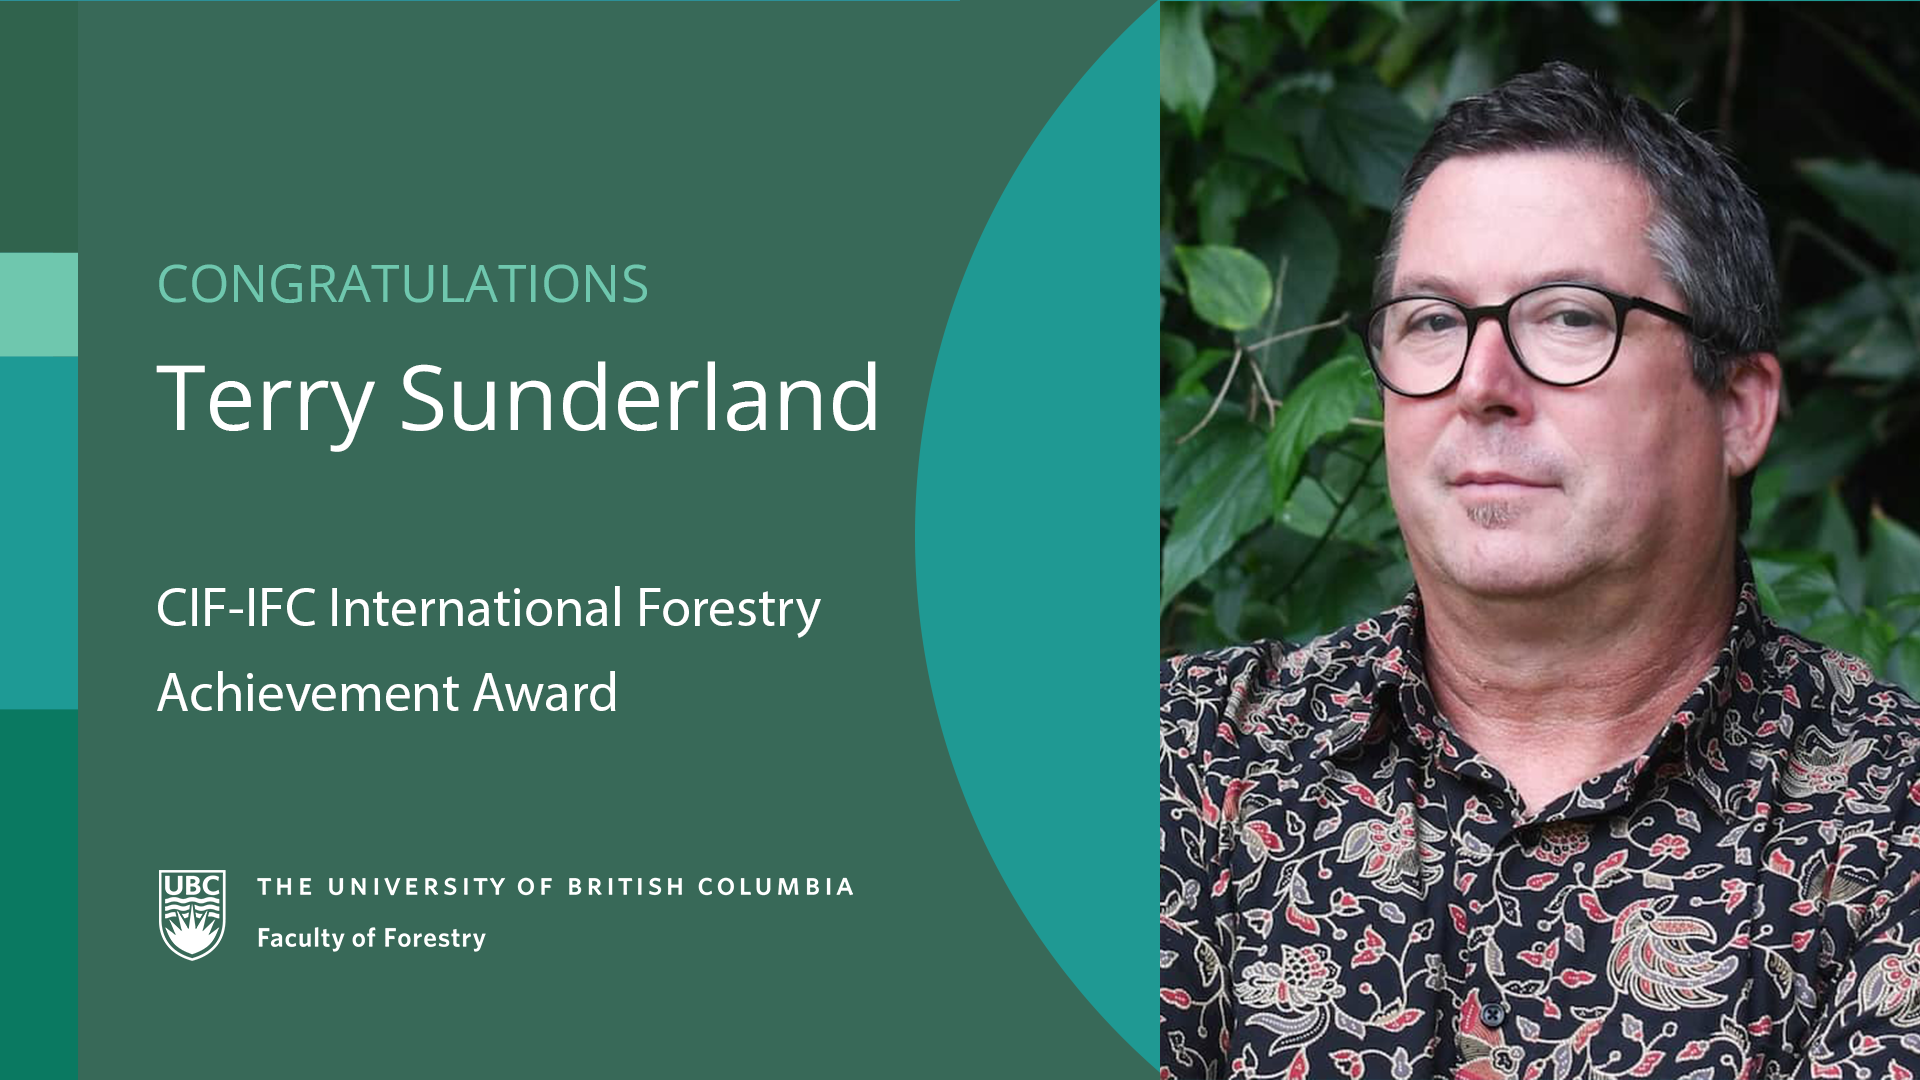 Photo of Terry Sunderland with text reading "Congratulations Terry Sunderland CIF-IFC International Forestry Achievement Award"